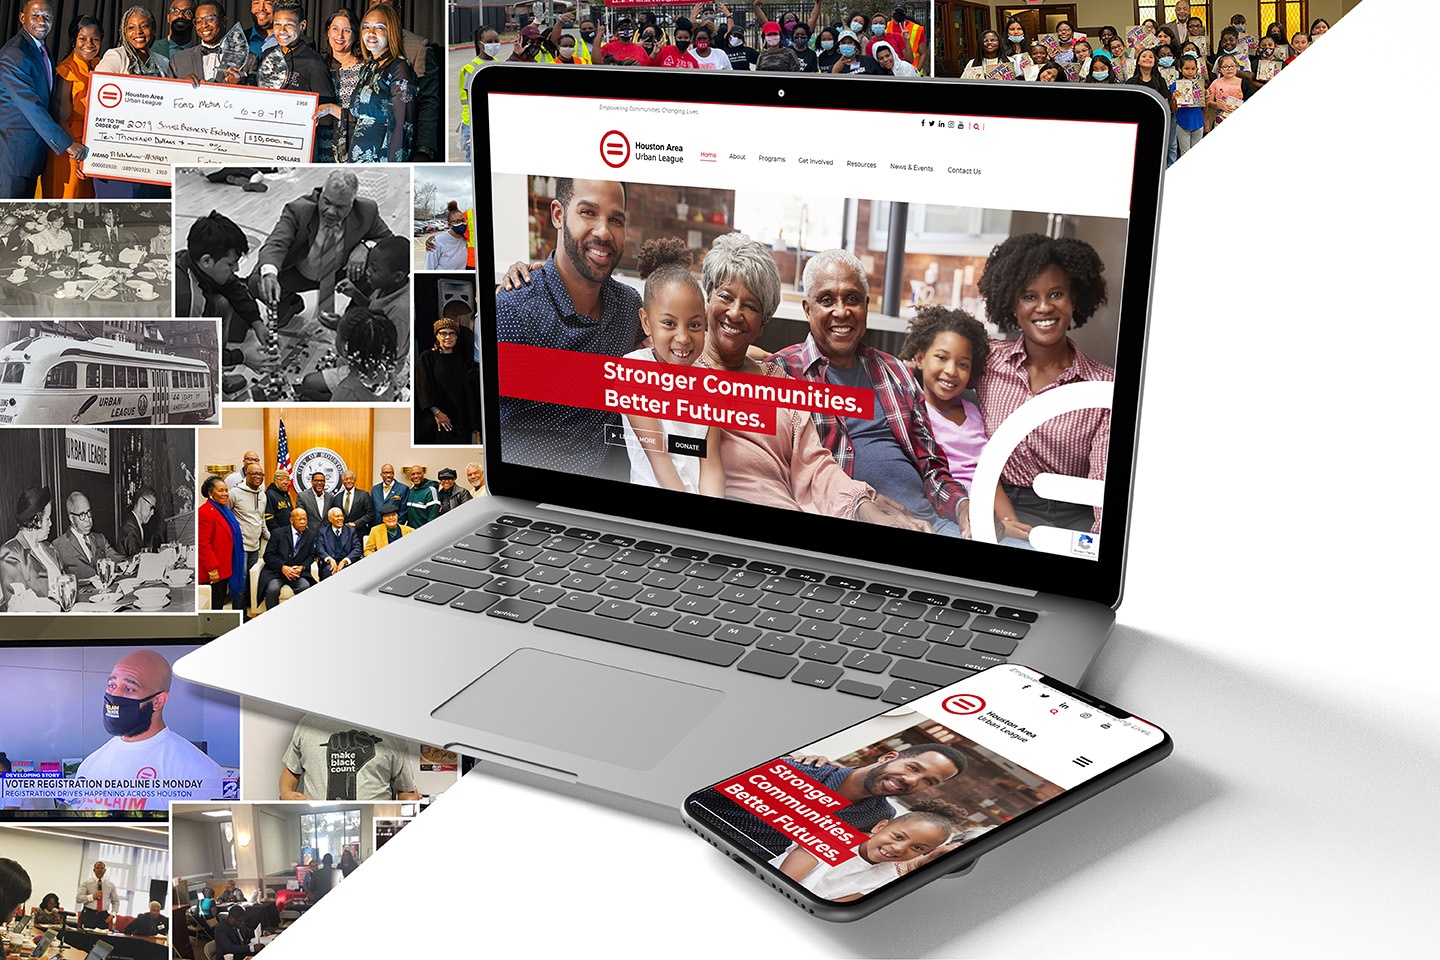 Community Support and Advocacy NonProfit | Houston Area Urban League Website by B.ID